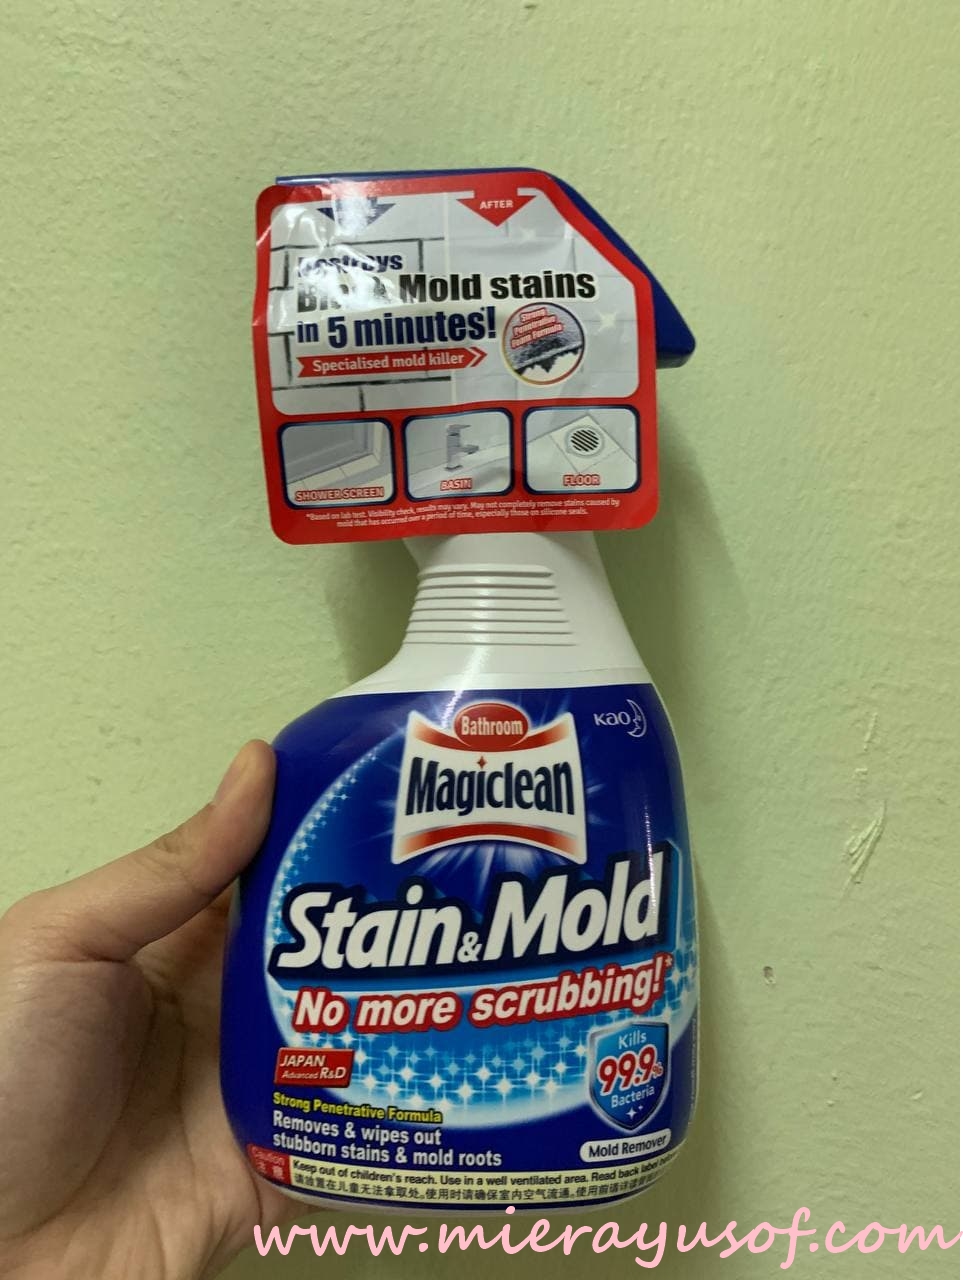 Magiclean stain and mold